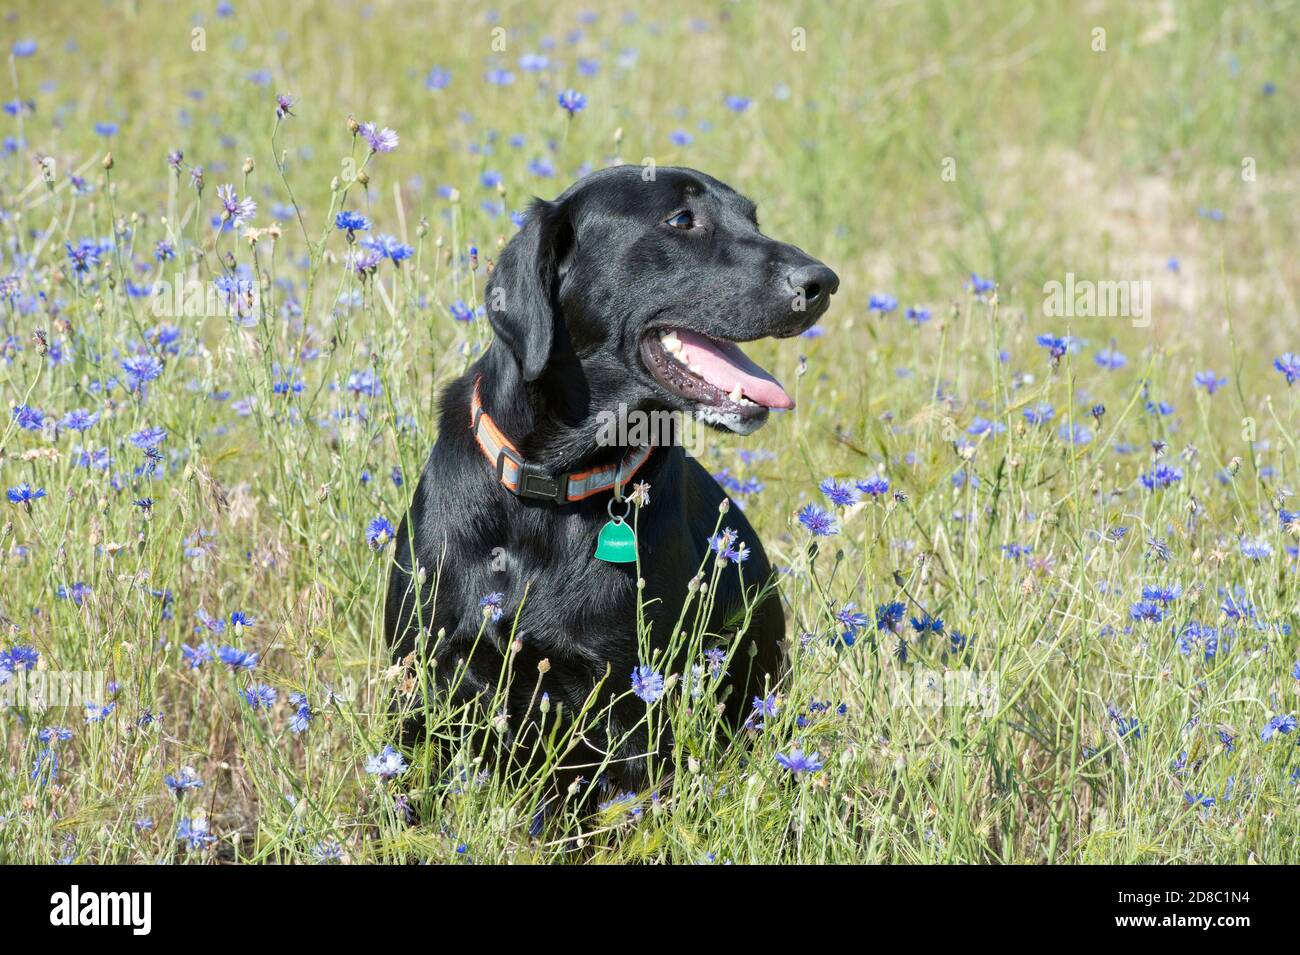 Black Labrador retriever sitting in a field of bachelor buttons Stock Photo